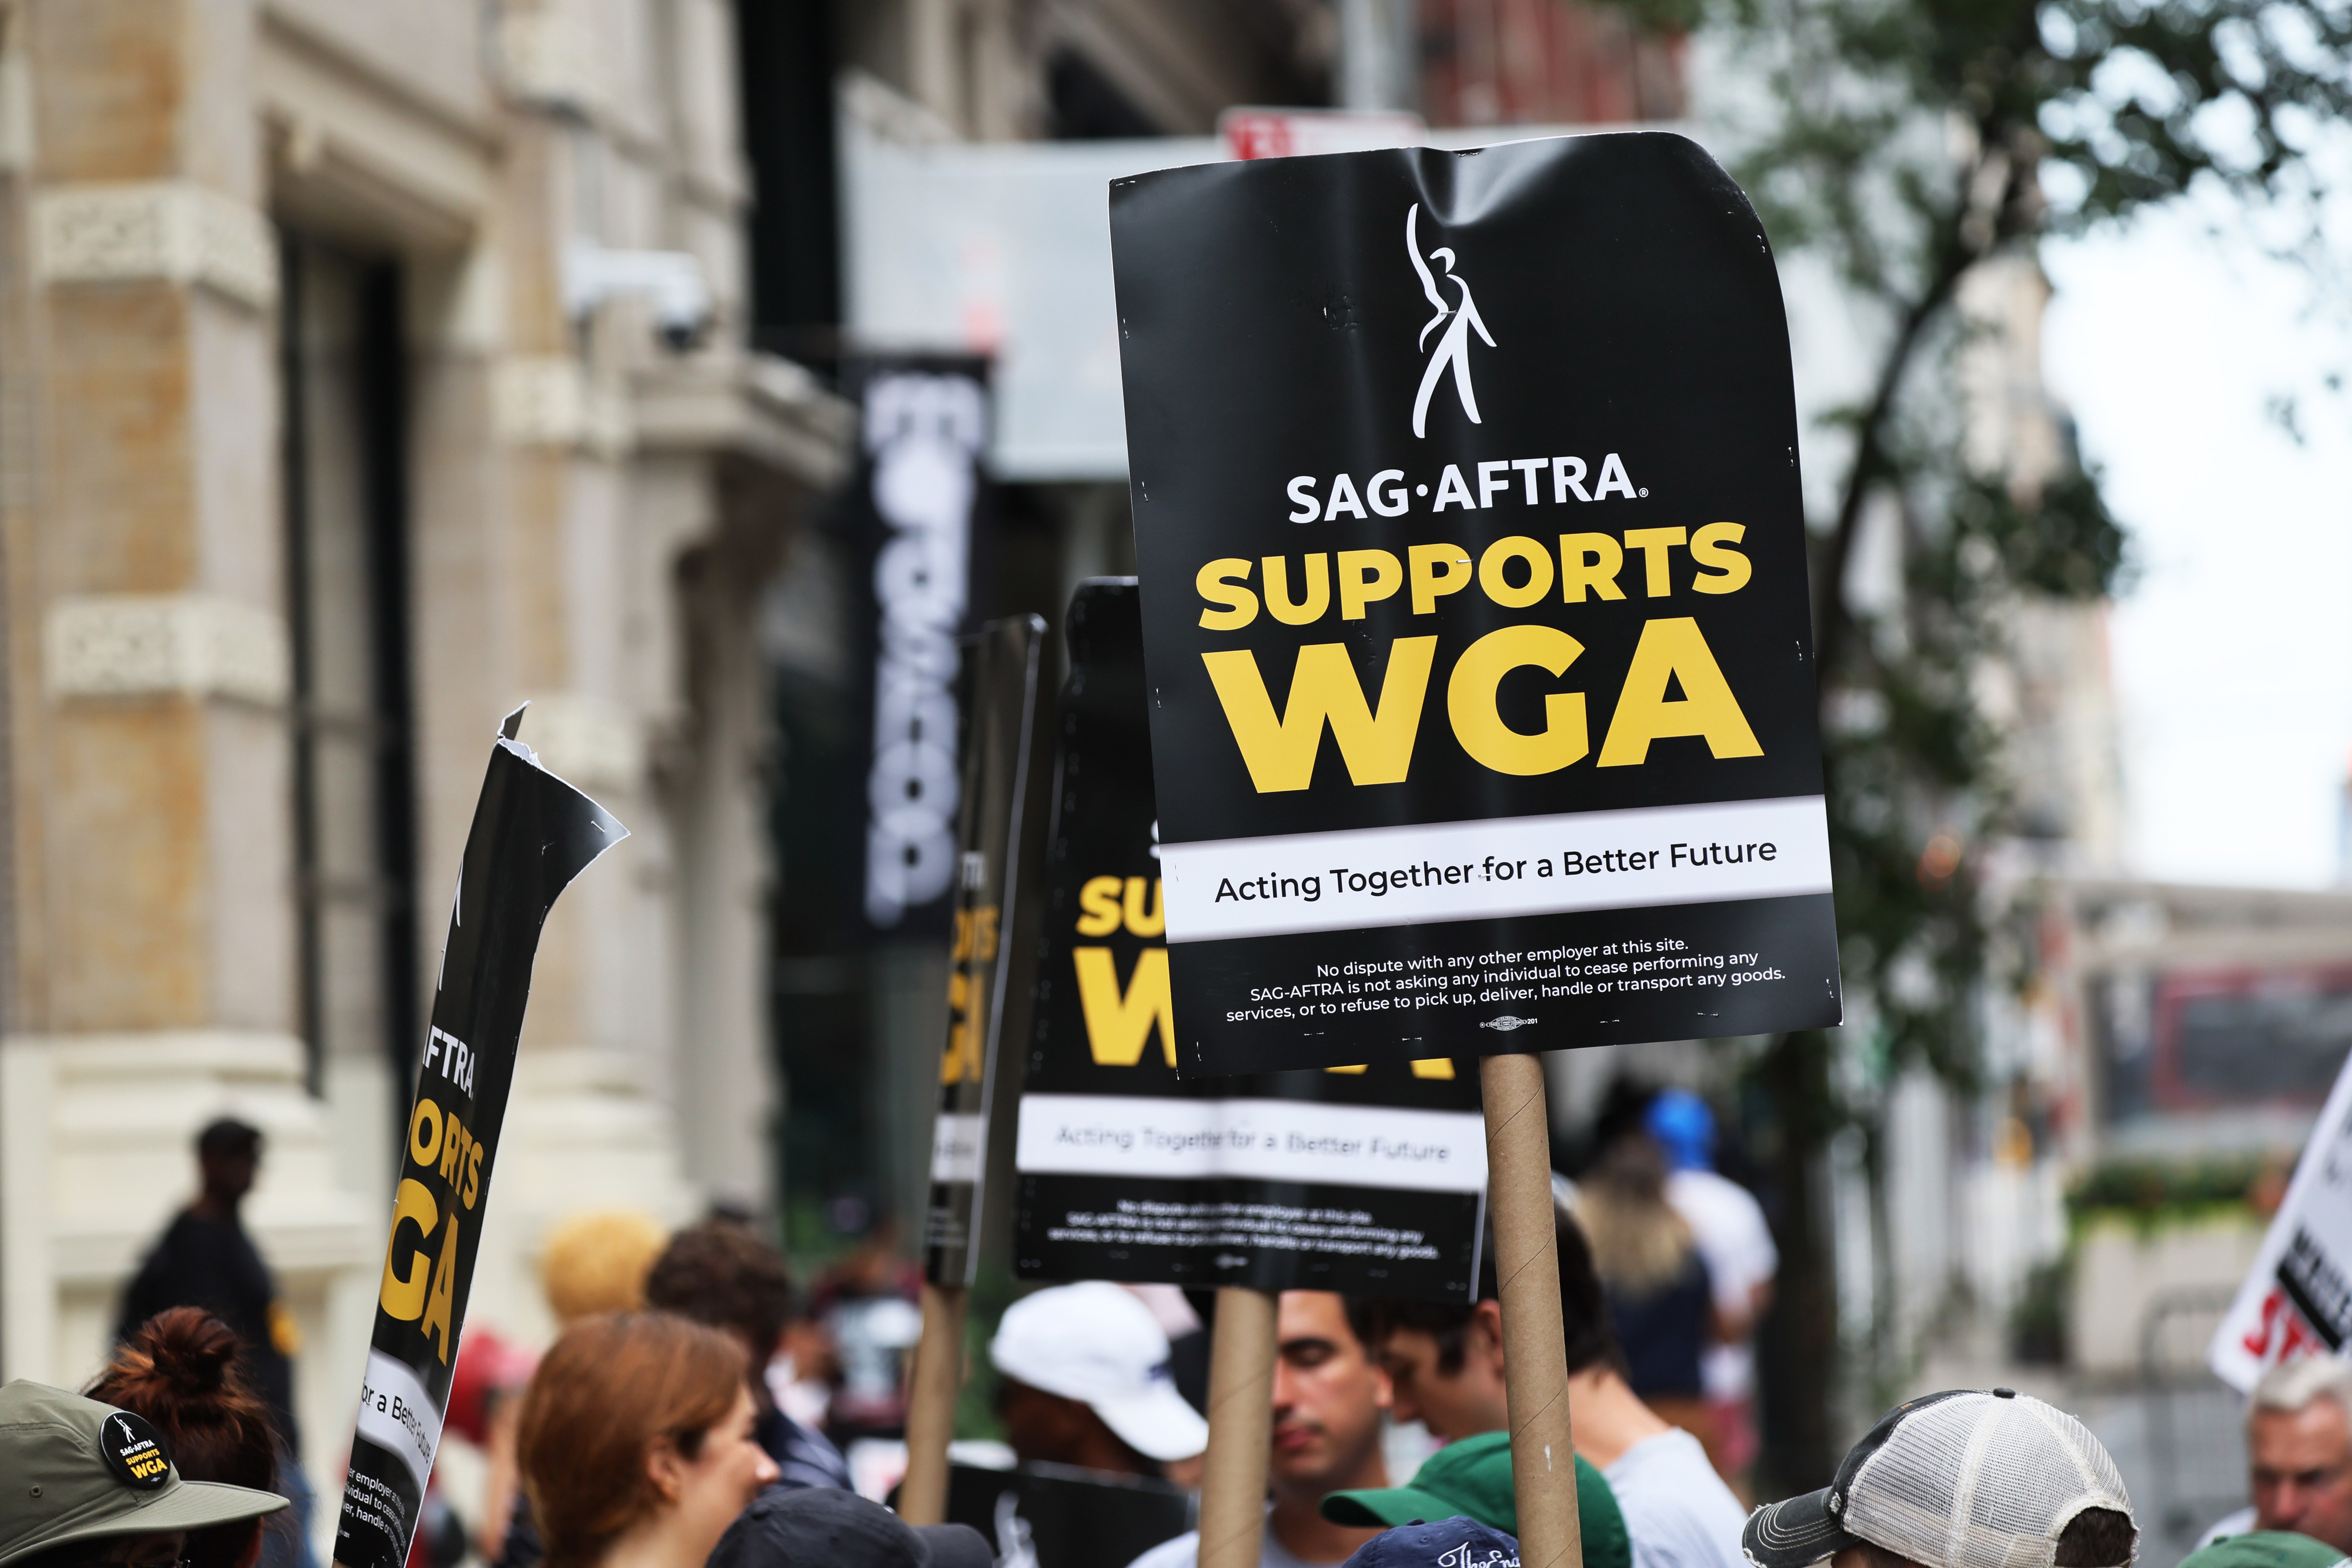 sag-aftra supports wga sign on the picket line